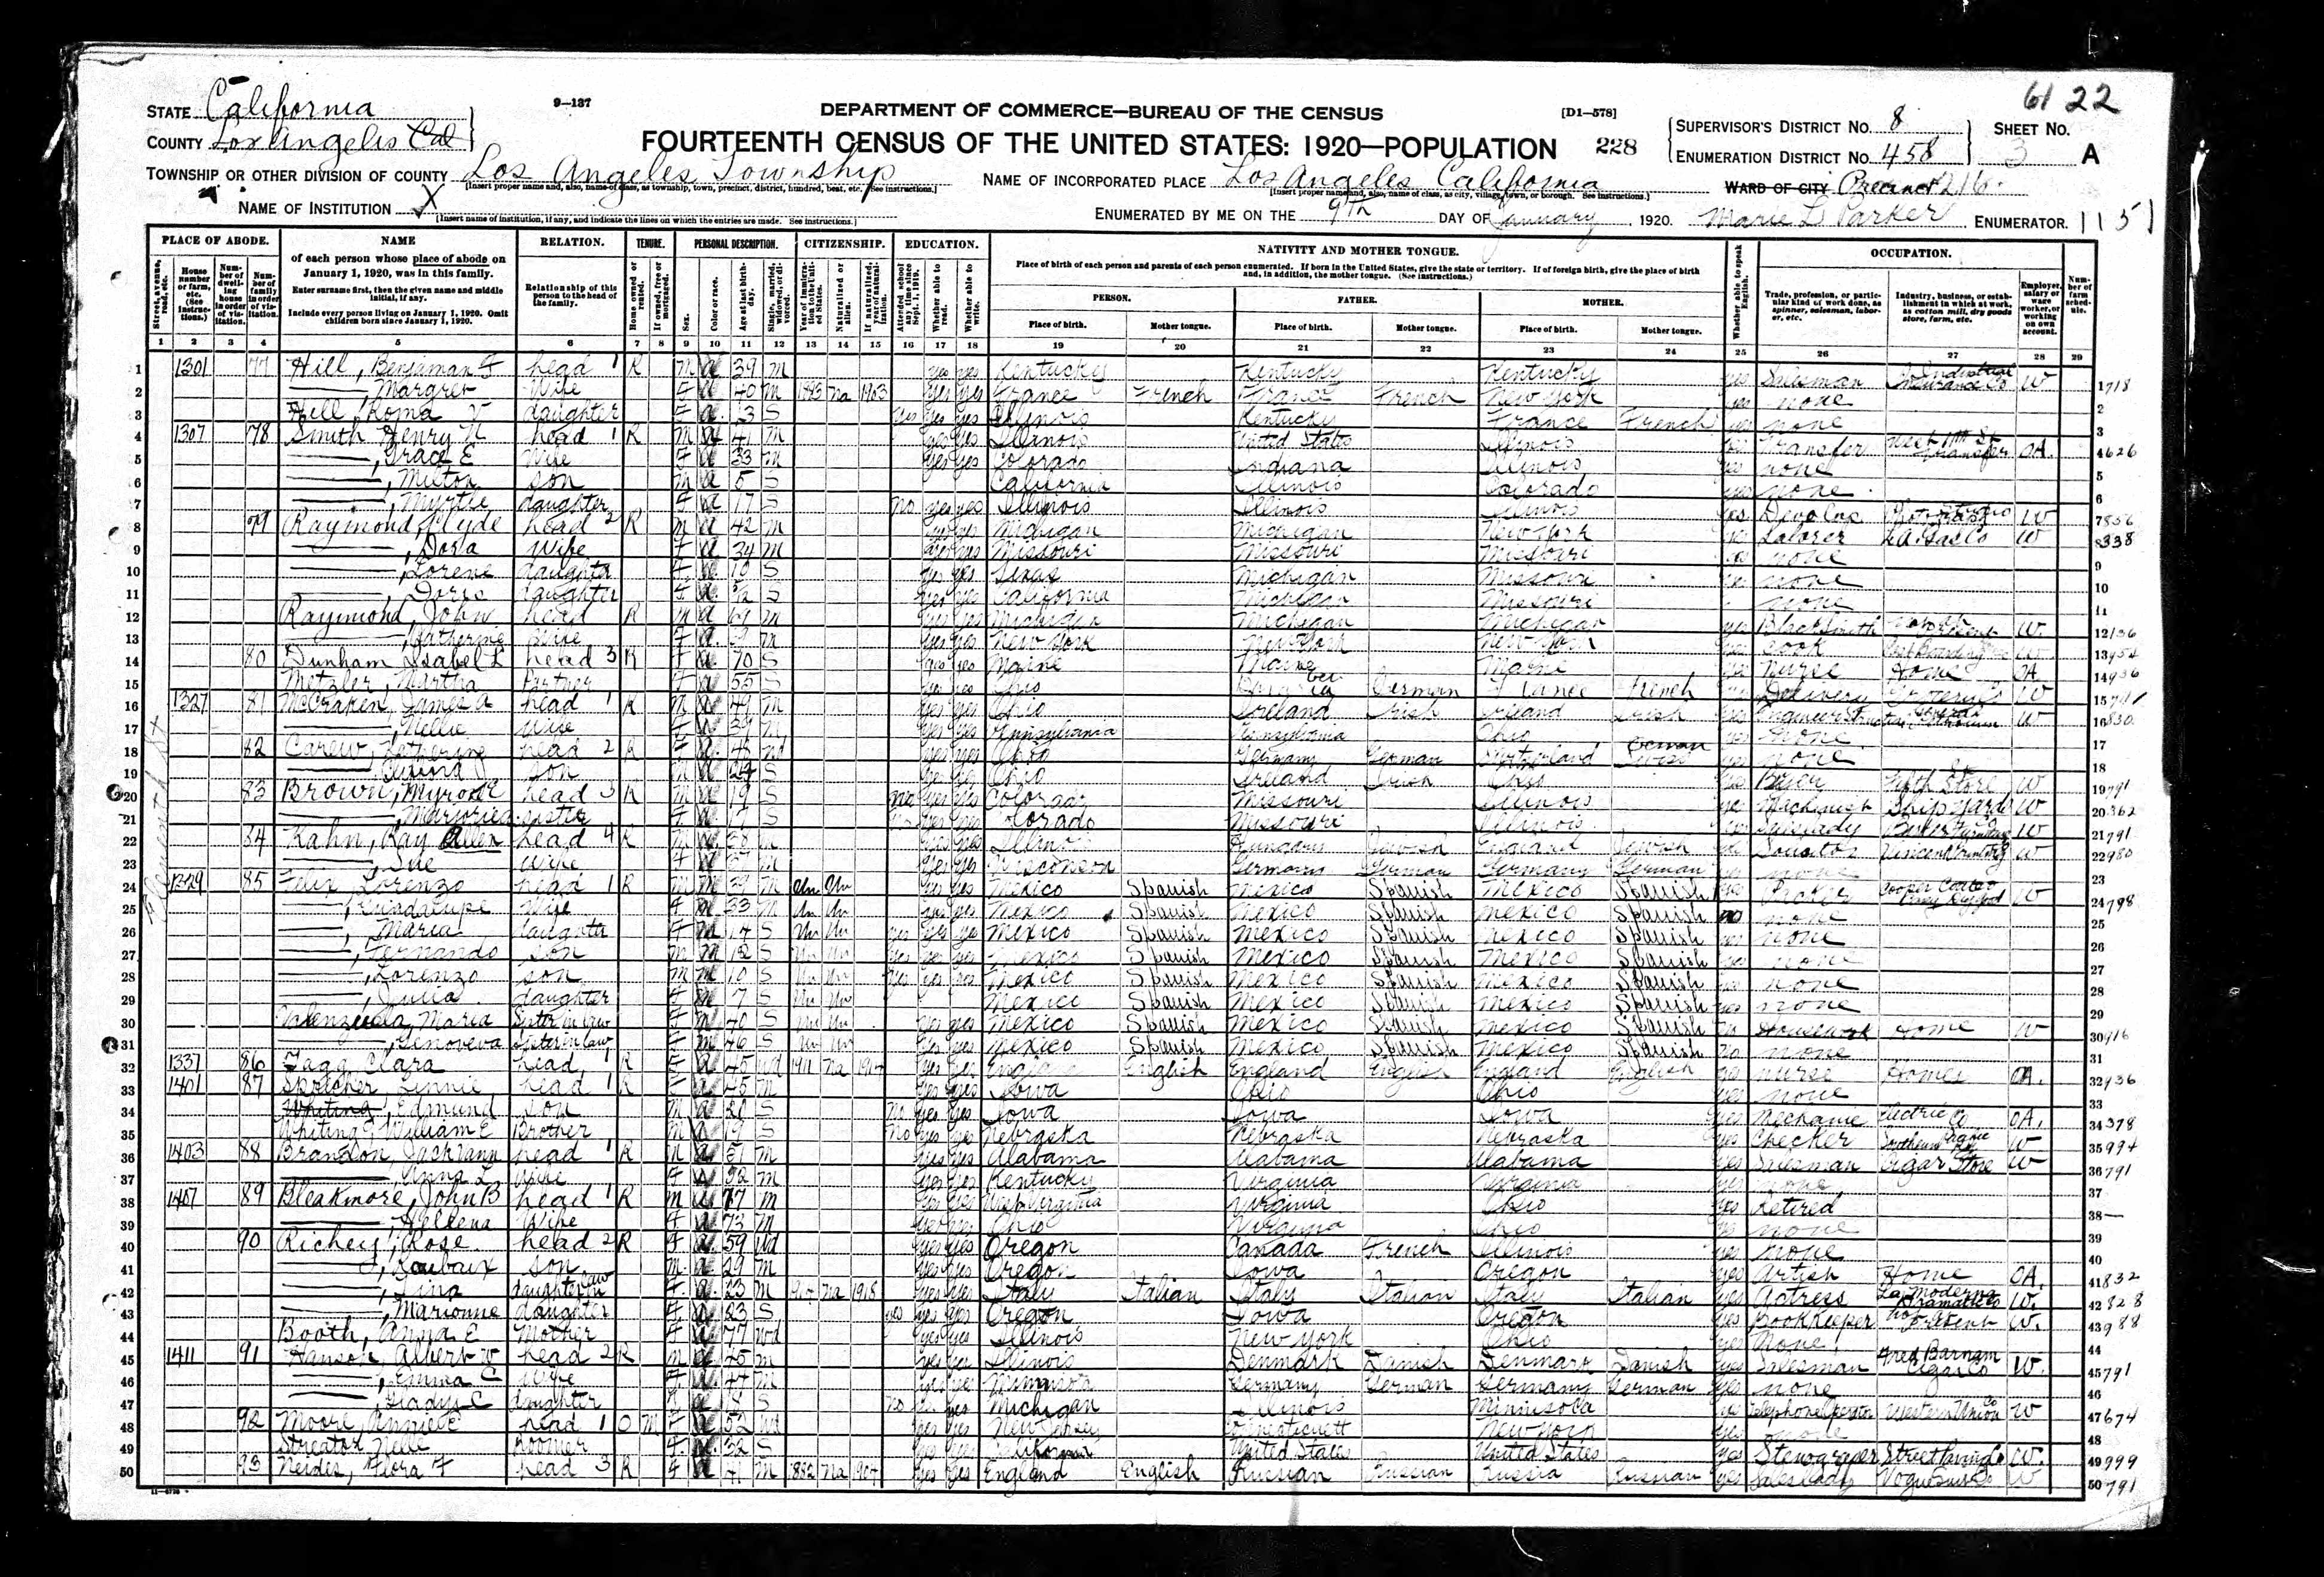 Clara gave her age as 45 at the time of the 1920 census.